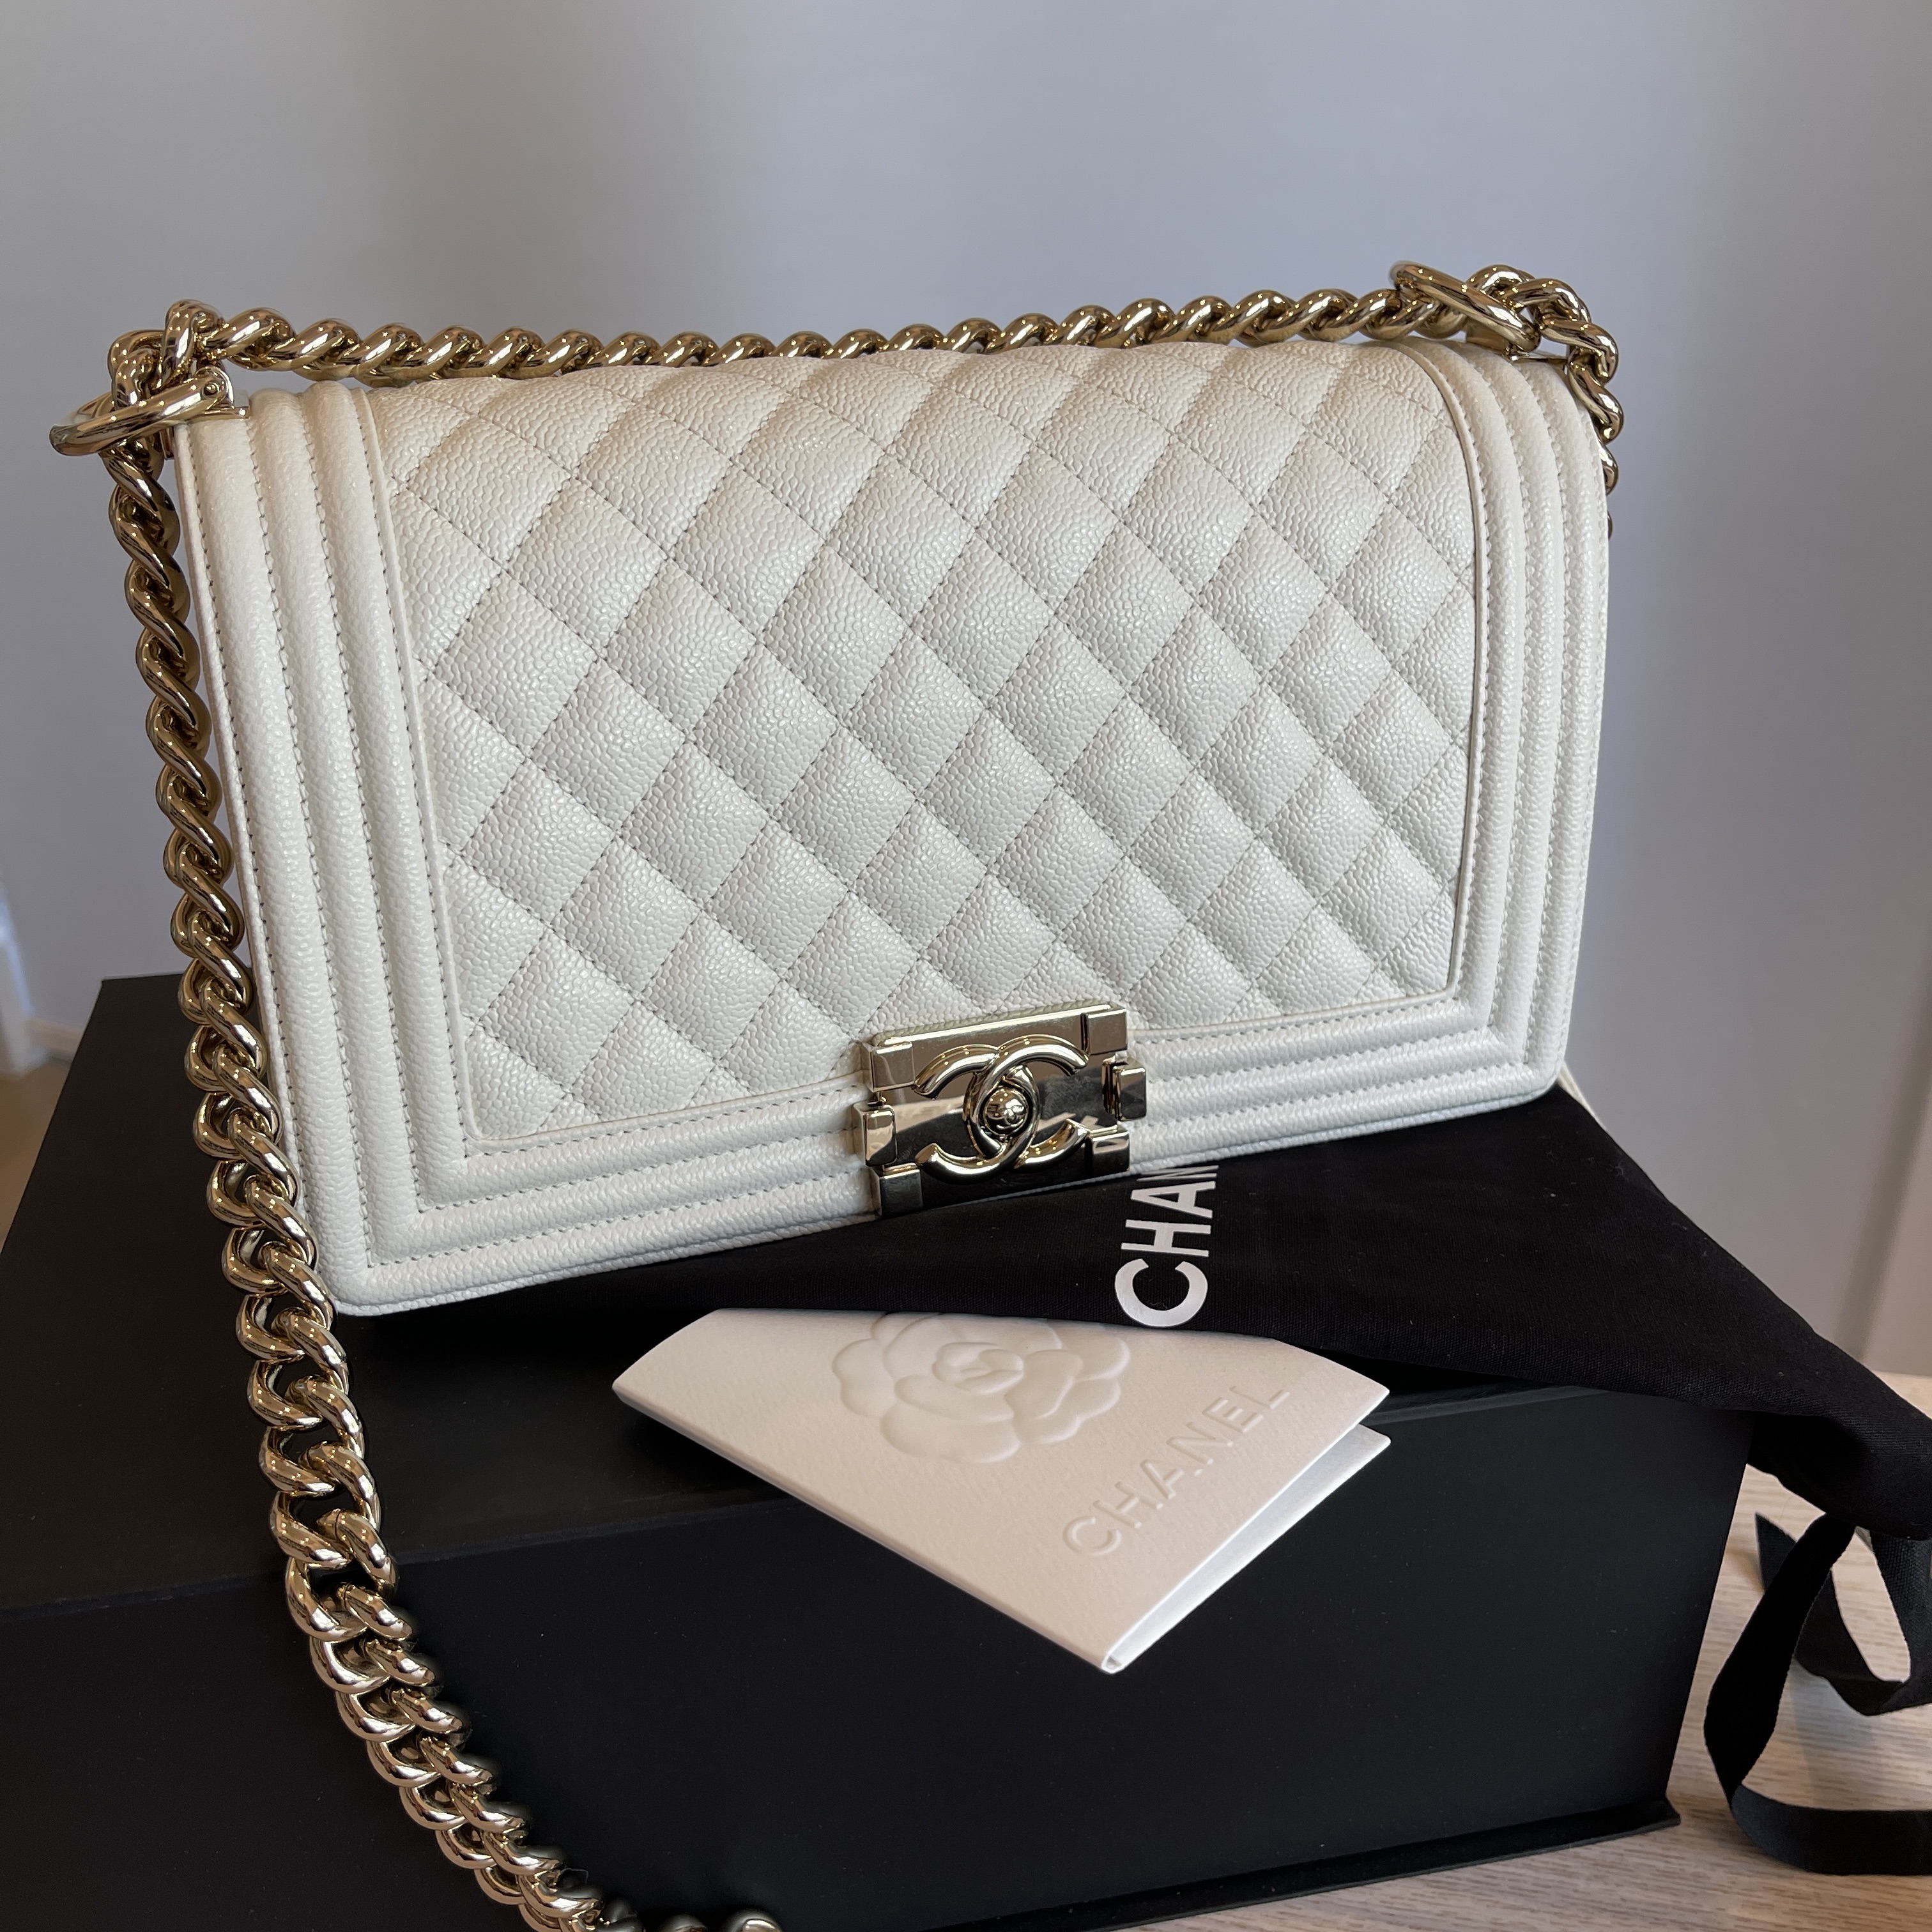 Chanel Black Quilted Lambskin Bucket Bag with Pearls Pale Gold Hardware, 2021 (Very Good)